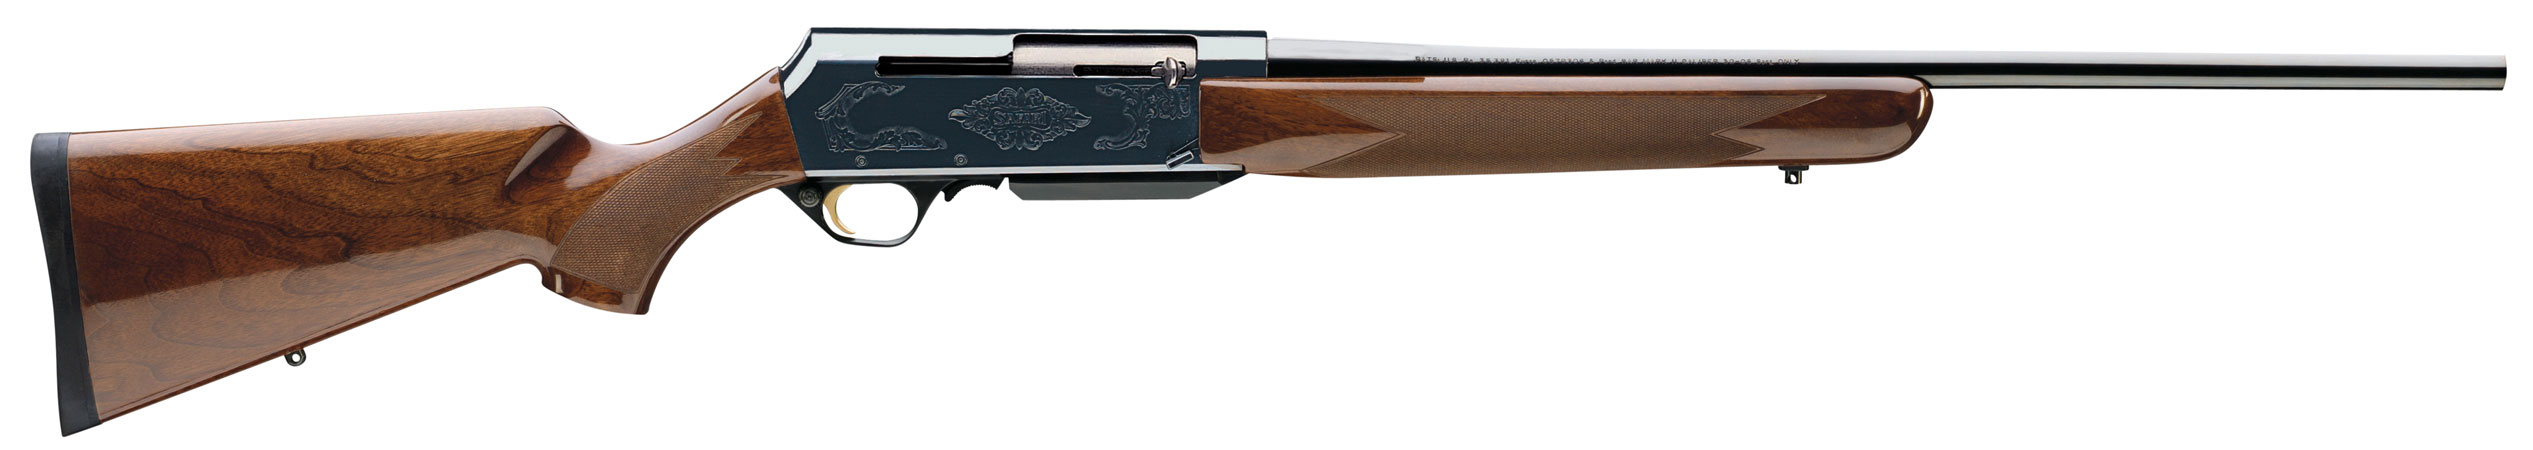 Browning - BAR - 270 for sale